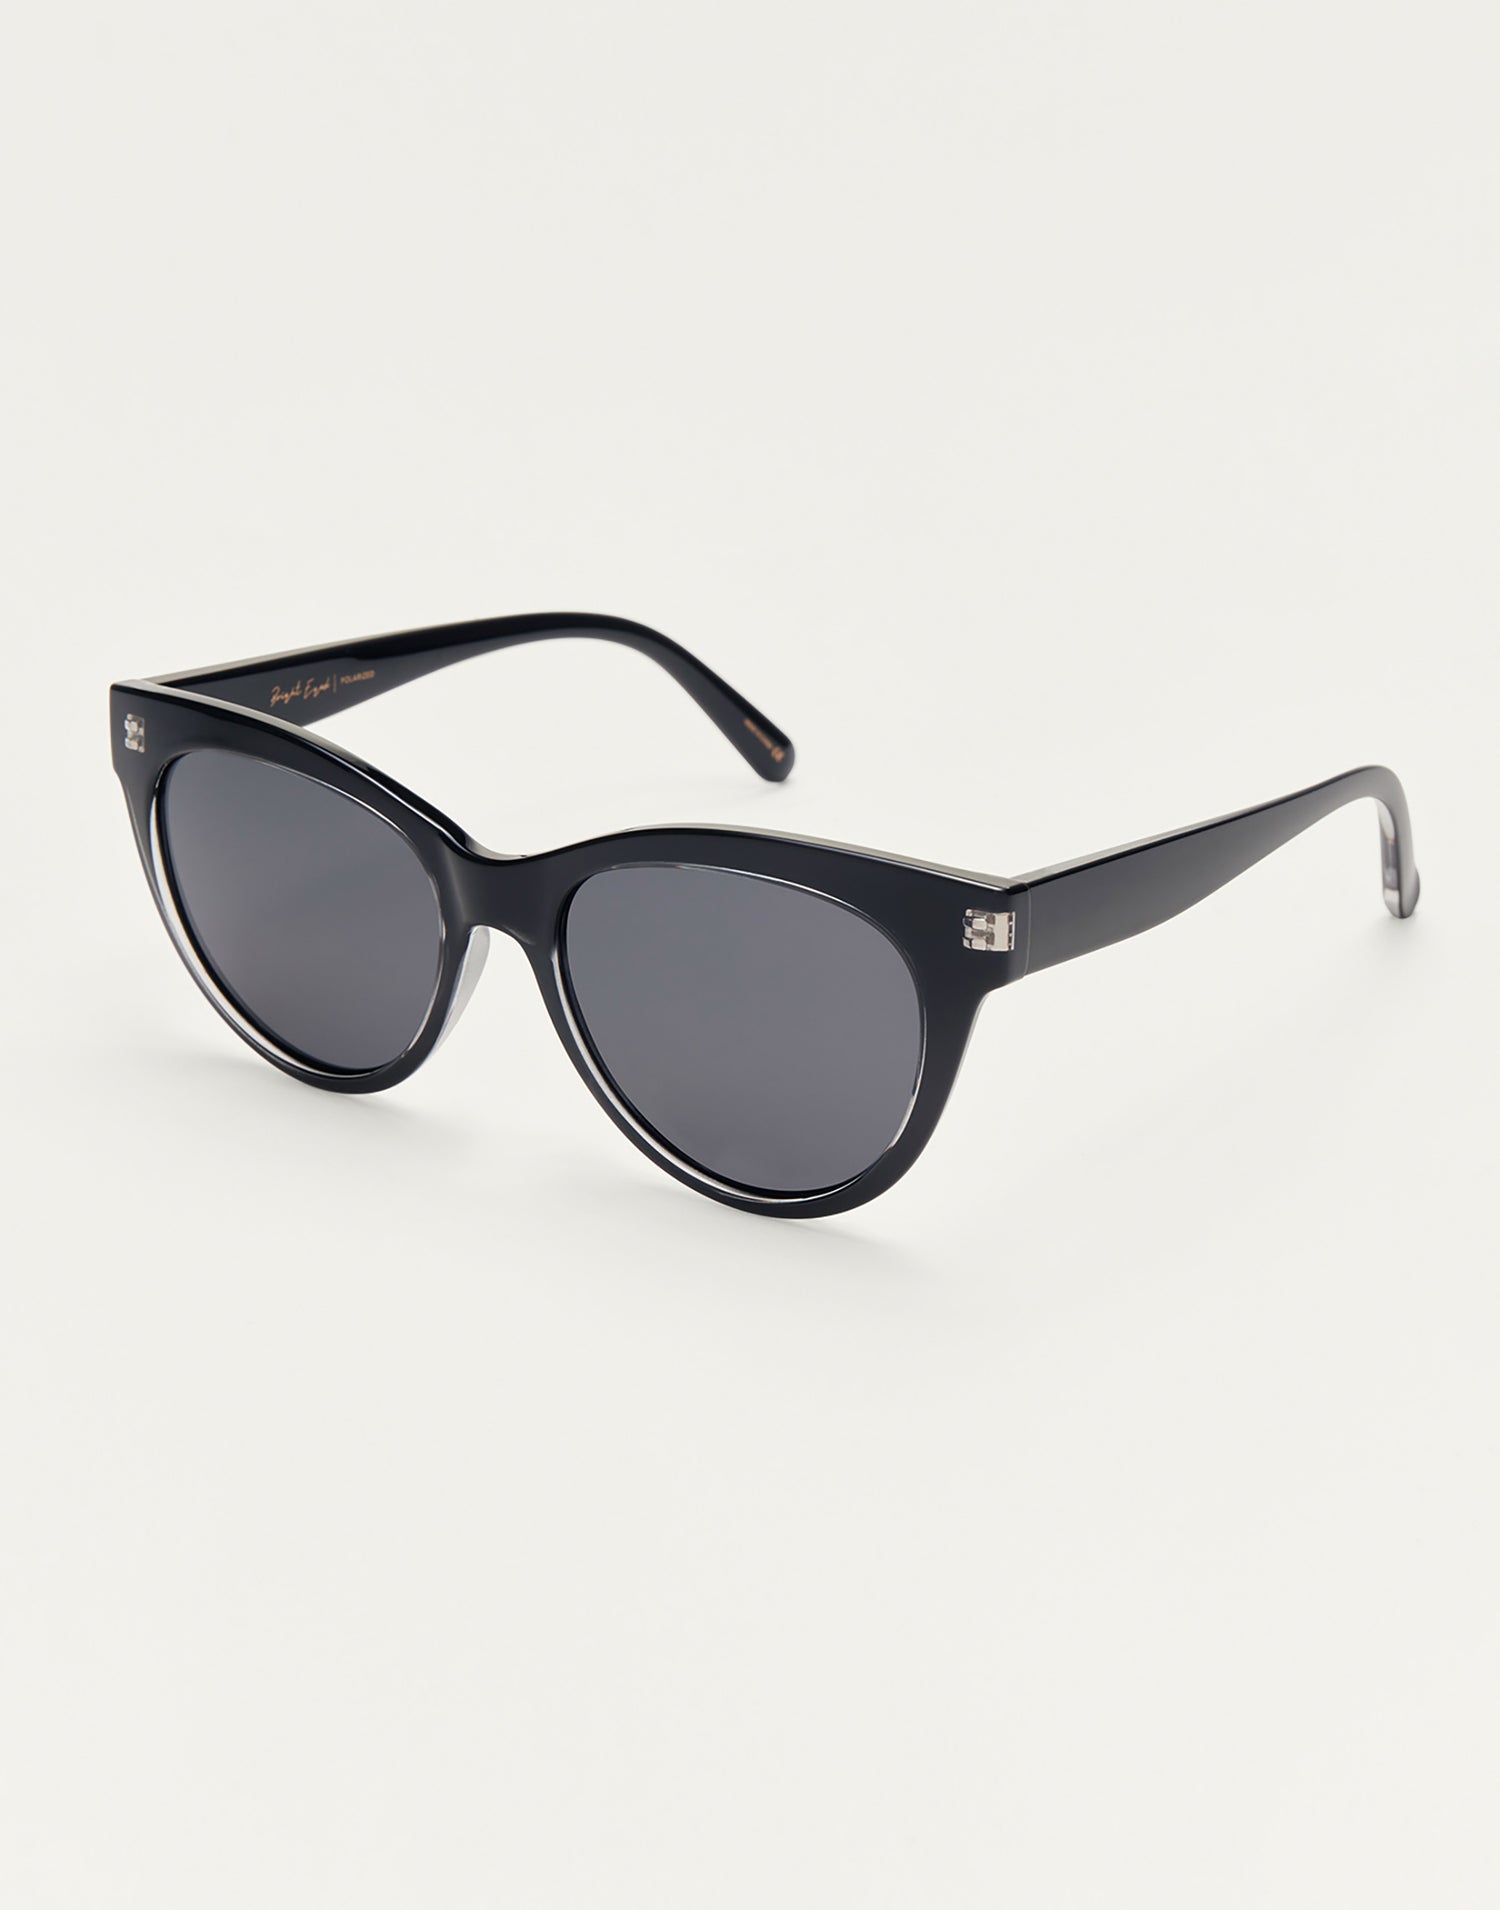 Bright Eyed Sunglasses by Z Supply in Crystal Black - Angled View